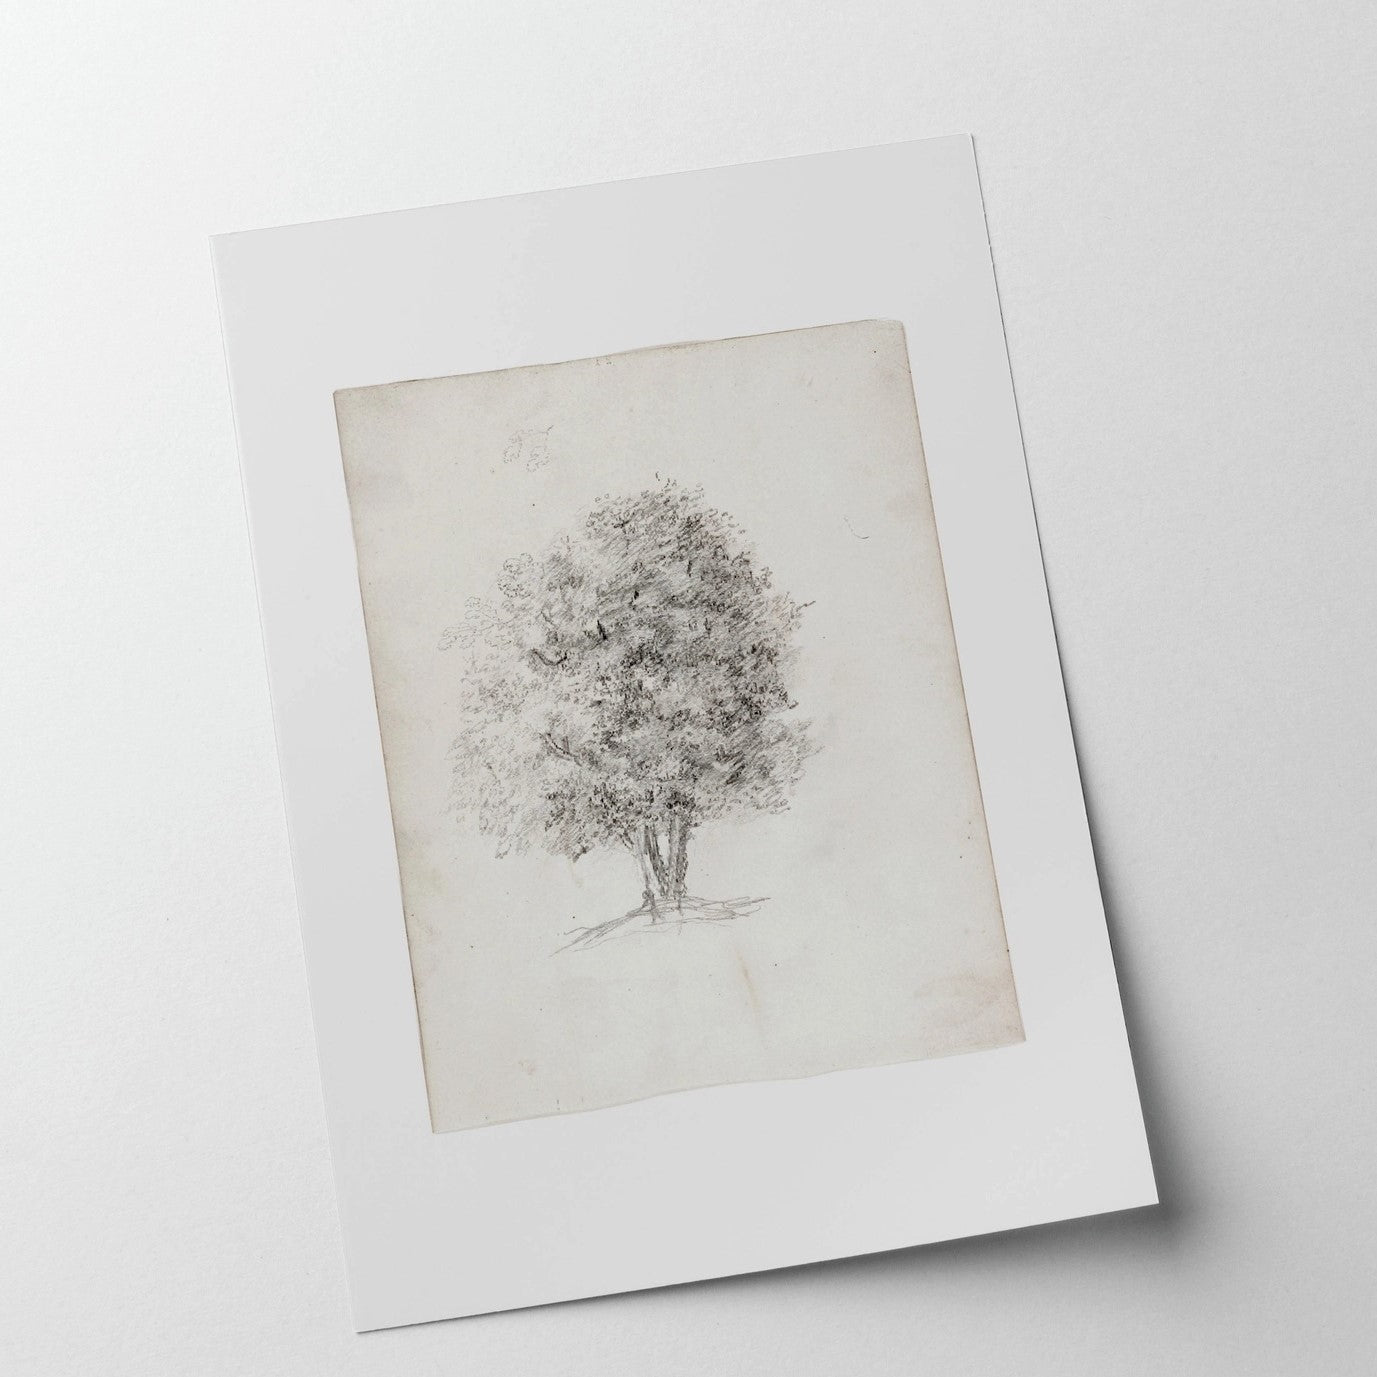 This Apple Tree Sketch Print has a delicate and breezy feel, and will add an artistic touch to any room. Printed on high quality museum stock with archival ink. Image size: 8"x10". Print Only. No frame included.  Made in the USA